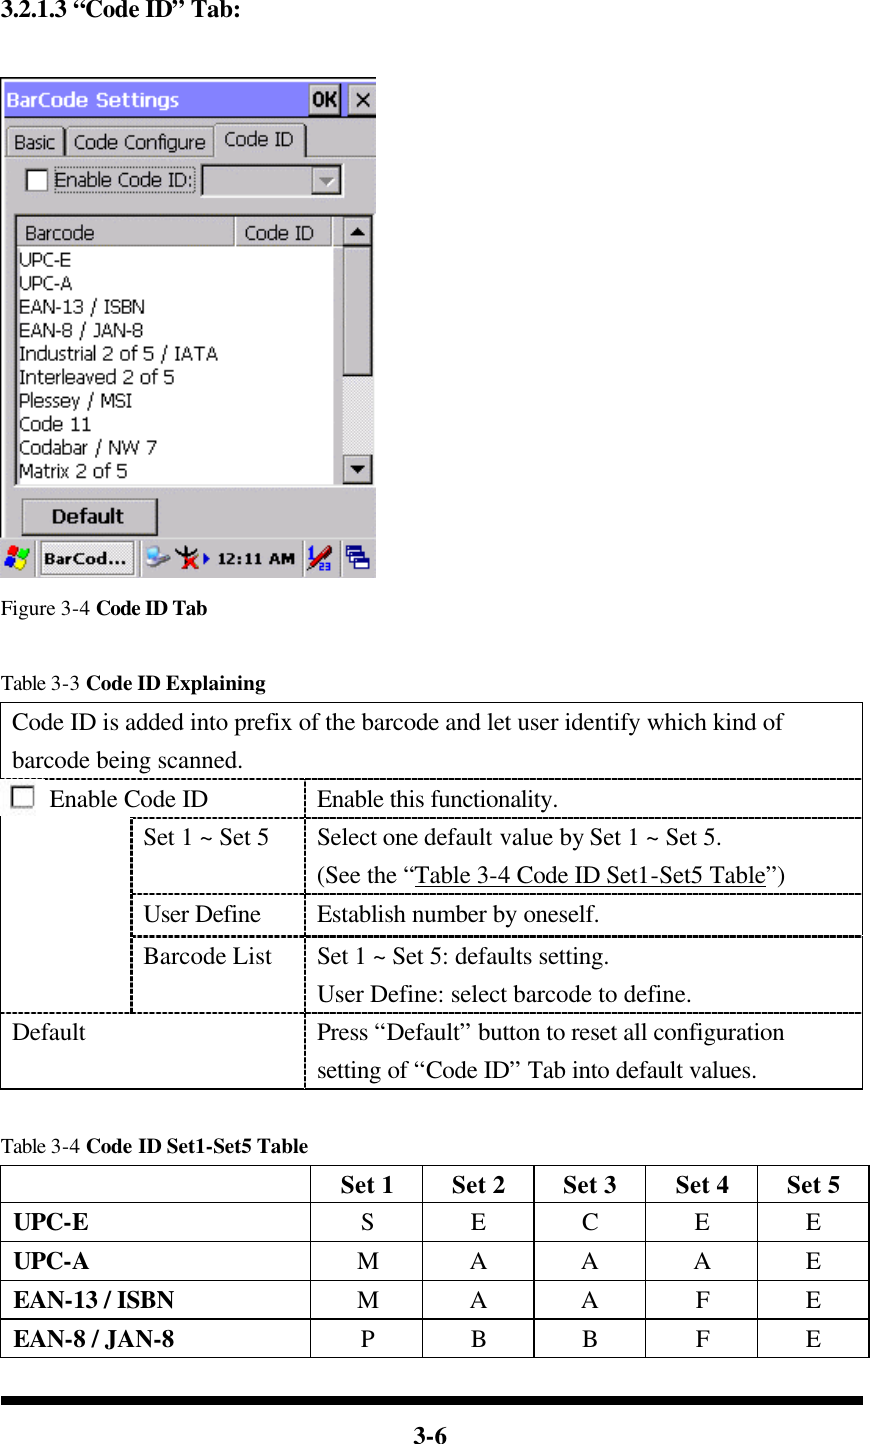  3-6   3.2.1.3 “Code ID” Tab:   Figure 3-4 Code ID Tab  Table 3-3 Code ID Explaining Code ID is added into prefix of the barcode and let user identify which kind of barcode being scanned. Enable Code ID Enable this functionality. Set 1 ~ Set 5 Select one default value by Set 1 ~ Set 5. (See the “Table 3-4 Code ID Set1-Set5 Table”) User Define Establish number by oneself.  Barcode List Set 1 ~ Set 5: defaults setting. User Define: select barcode to define. Default Press “Default” button to reset all configuration setting of “Code ID” Tab into default values.  Table 3-4 Code ID Set1-Set5 Table  Set 1 Set 2 Set 3 Set 4 Set 5 UPC-E S E C E E UPC-A M A A A E EAN-13 / ISBN M A A F E EAN-8 / JAN-8  P B B F E 